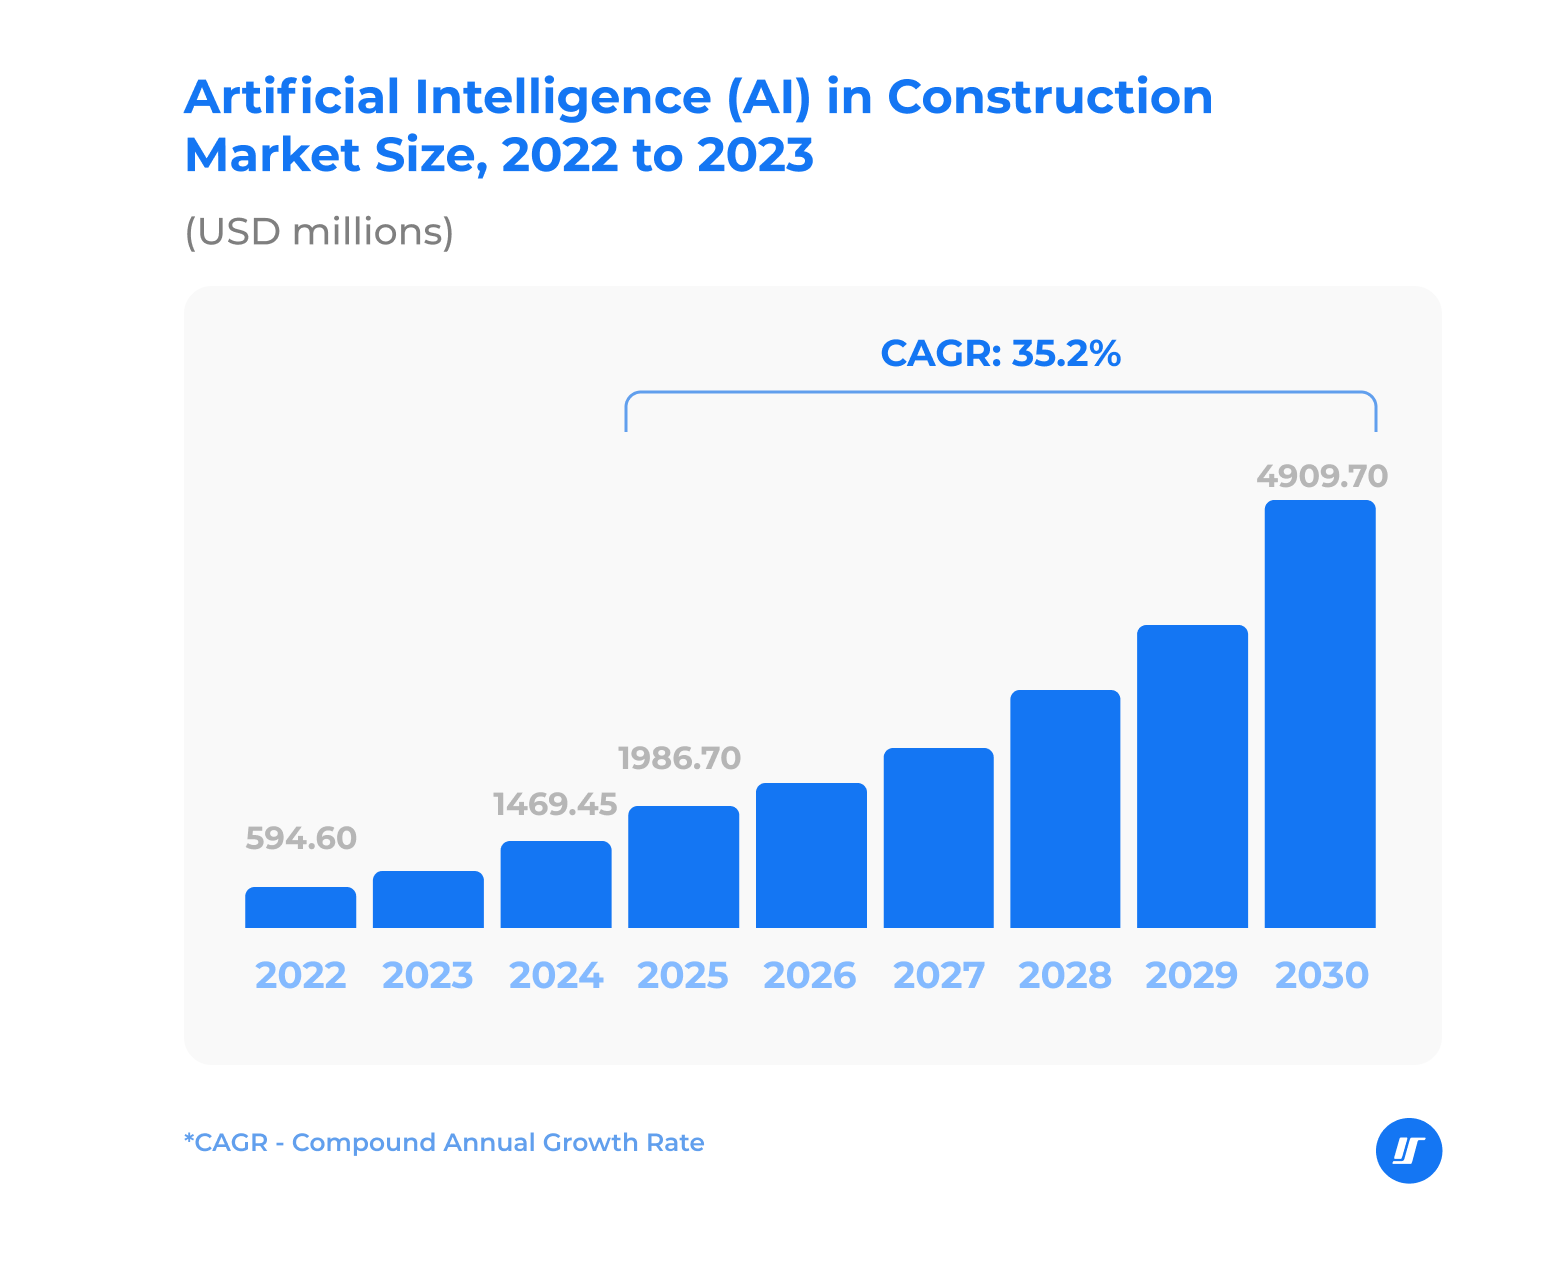 Graph of Al in construction market size, 2022-2023